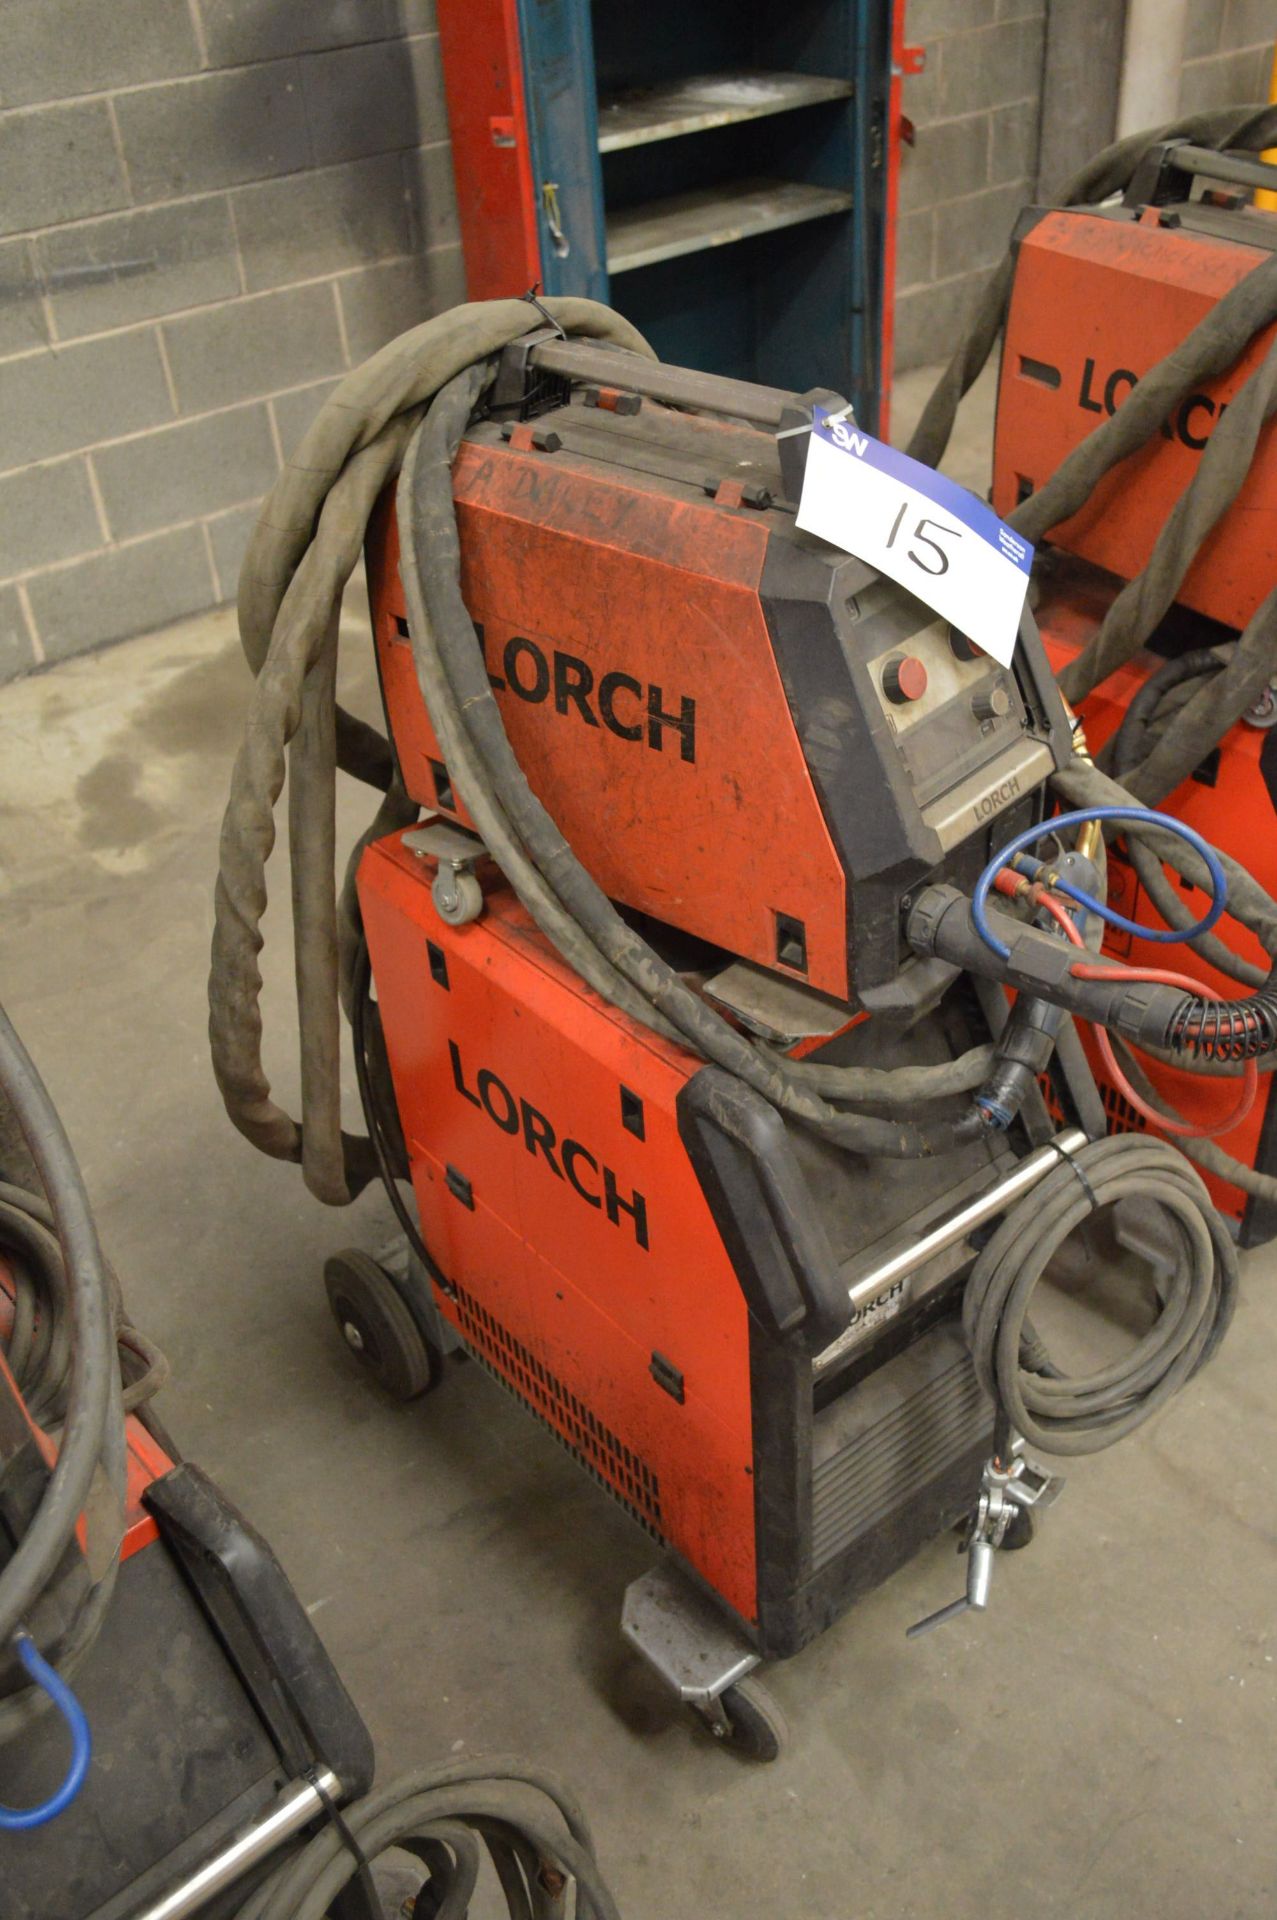 Lorch Micormig 400 Mig Welding Rectifier, serial no. 4062-2649-0023-2, with wire feed unit